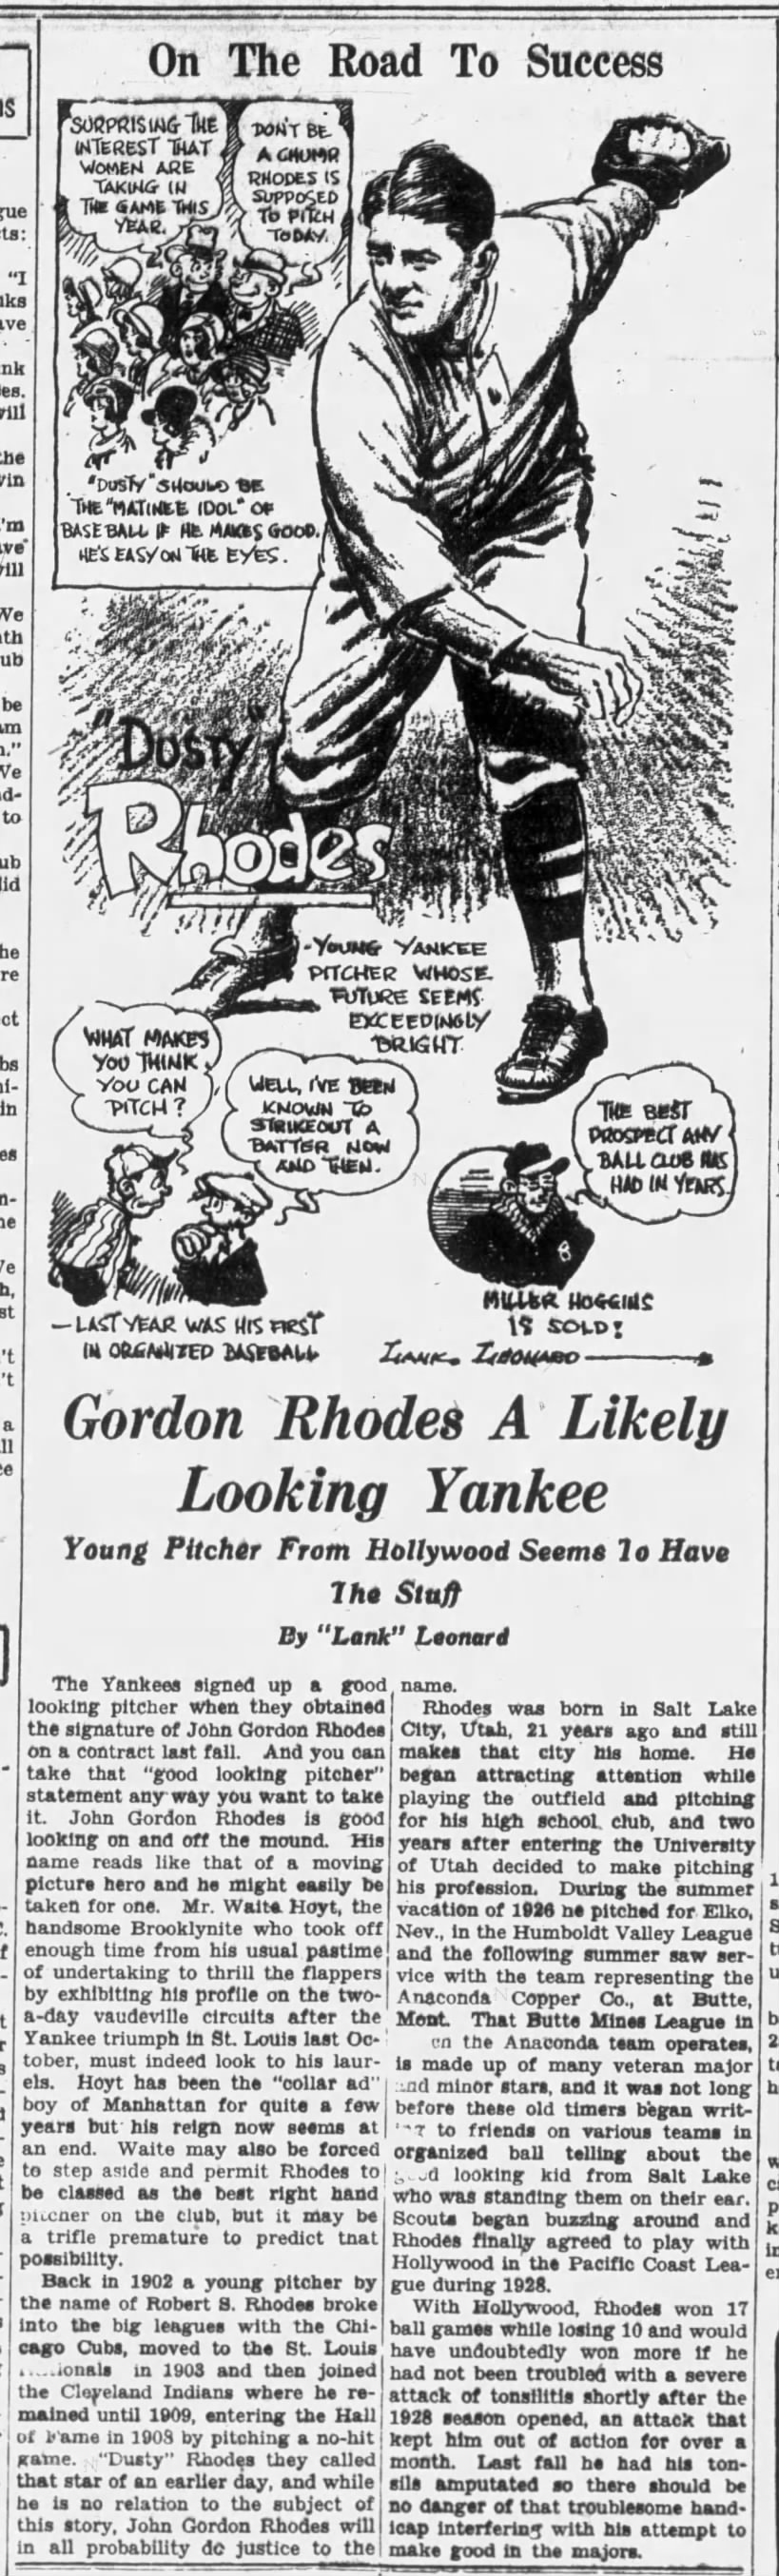 Gordon Rhodes A Likely Looking Yankee